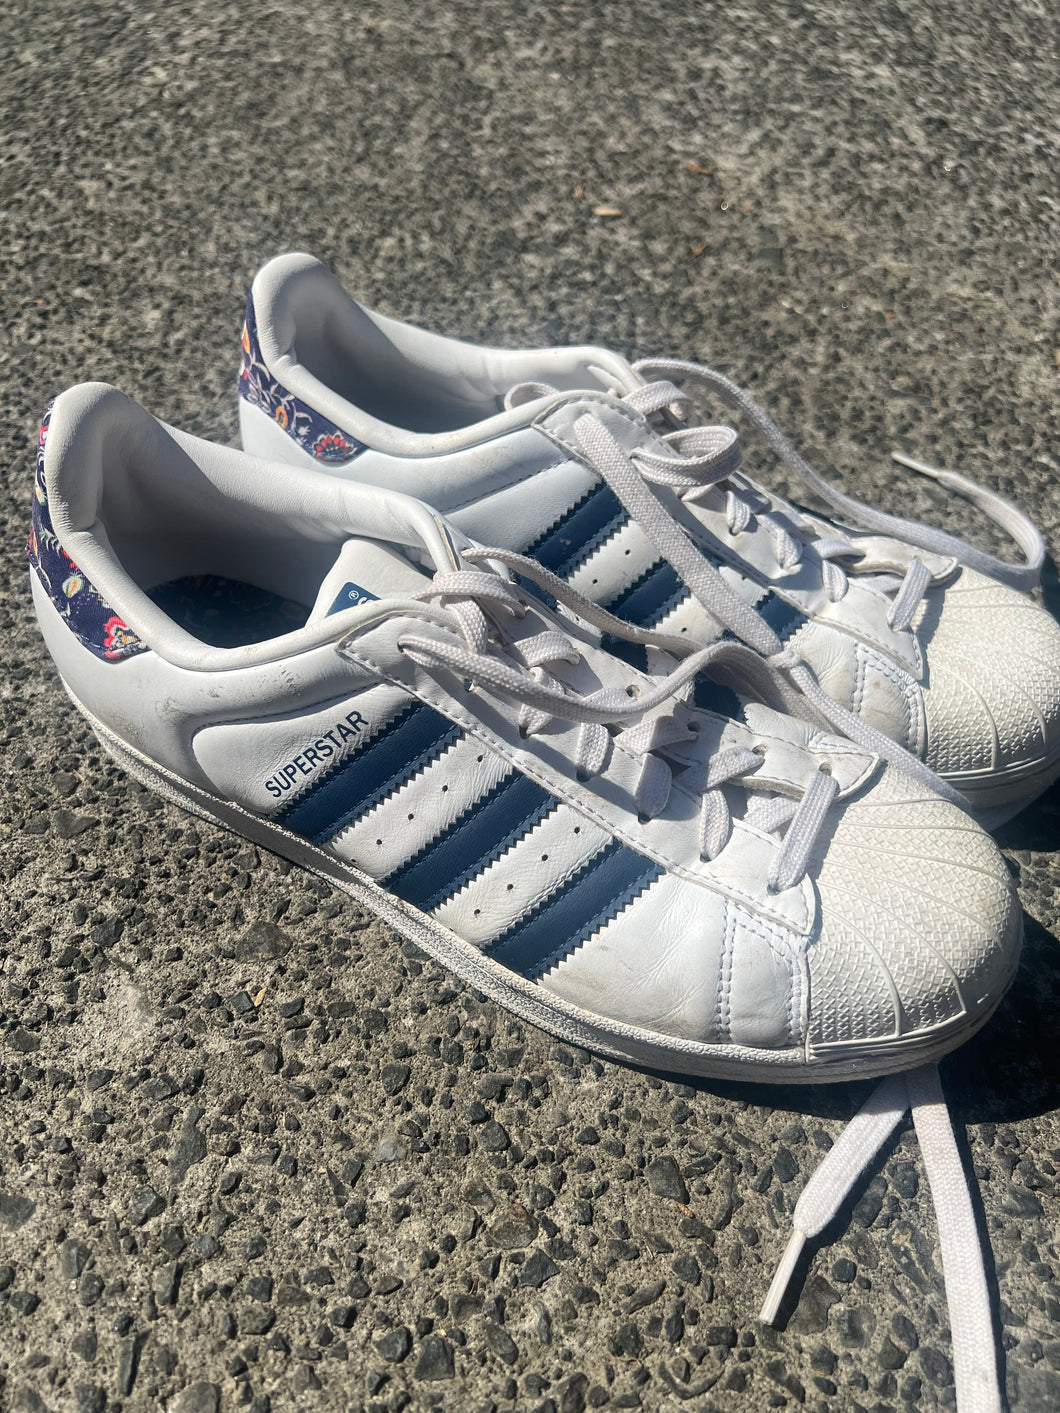 ADIDAS SUPERSTAR SHOES - US 8 1/2